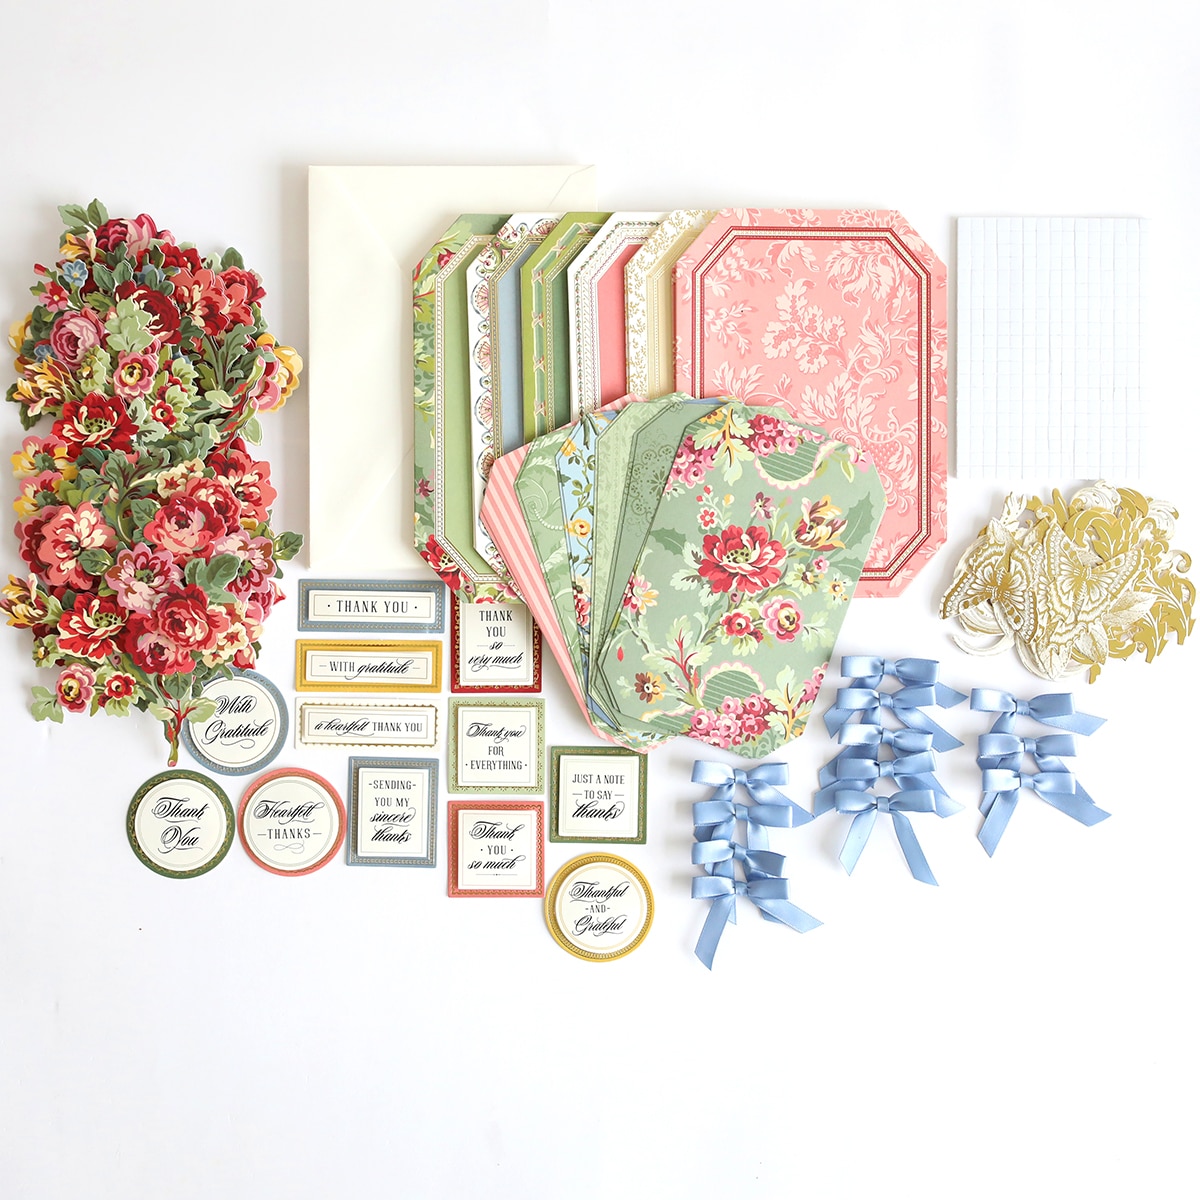 A collection of Simply Gratitude Card Making Kit, ribbons, and other items are laid out on a white surface.